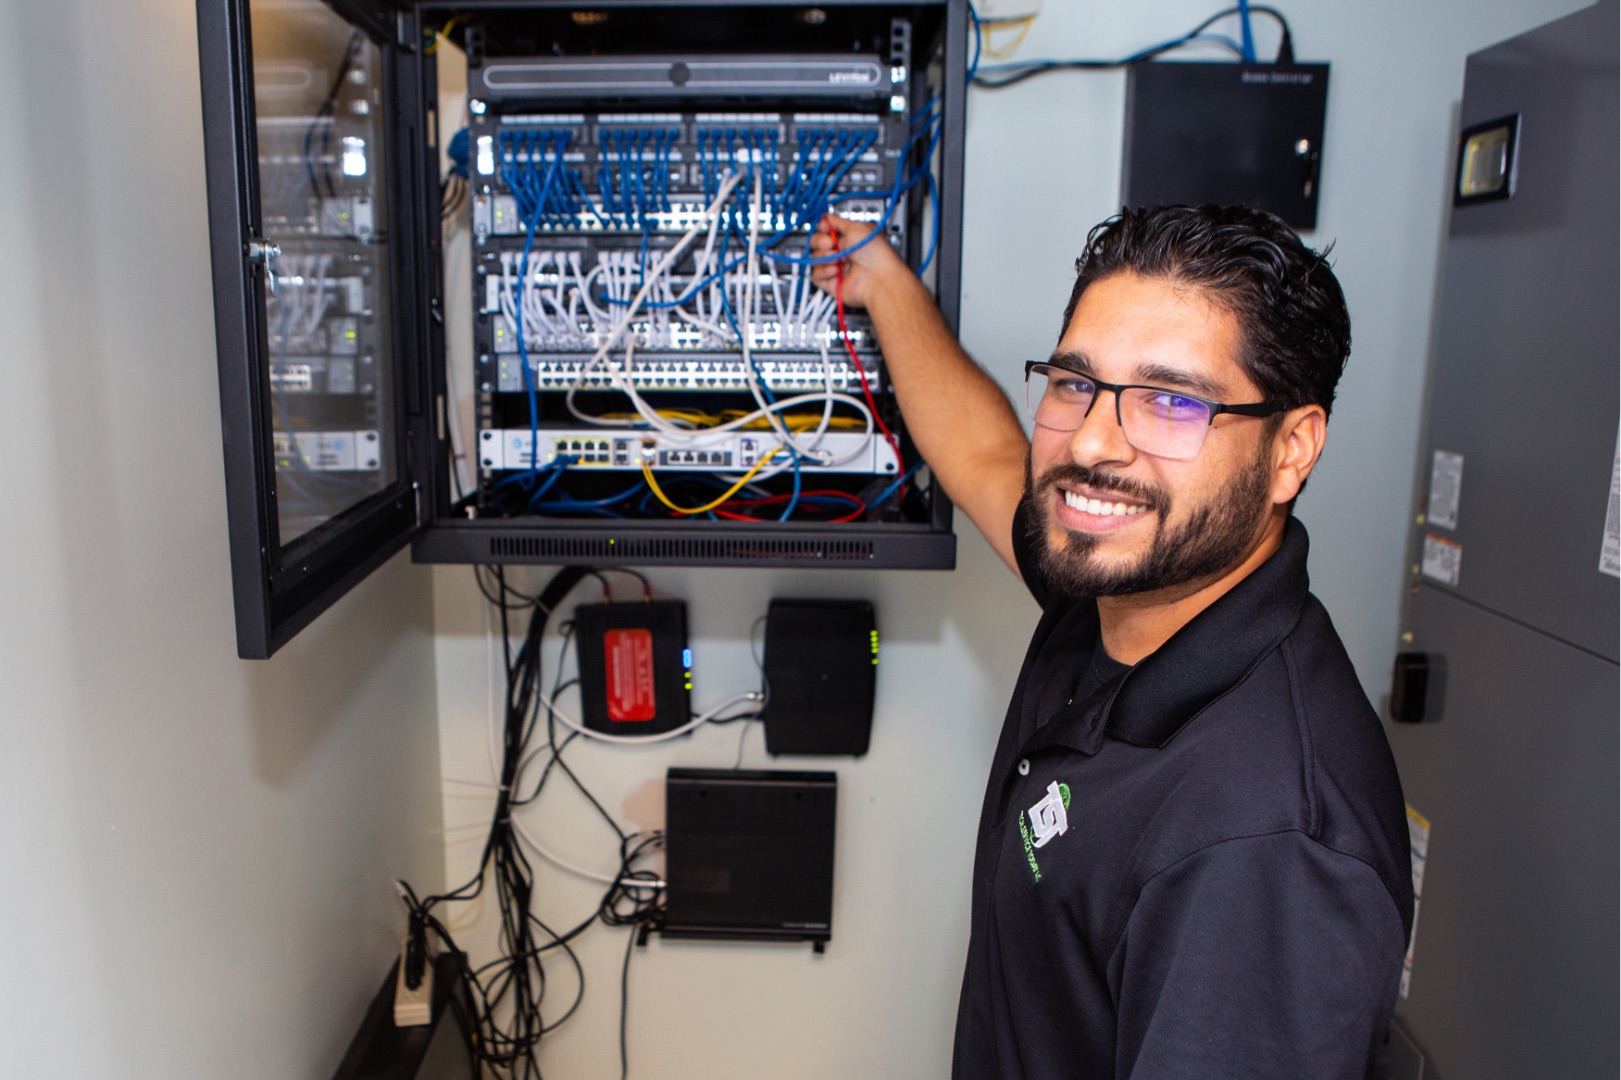 IT technician smiling while plugging in a wire.